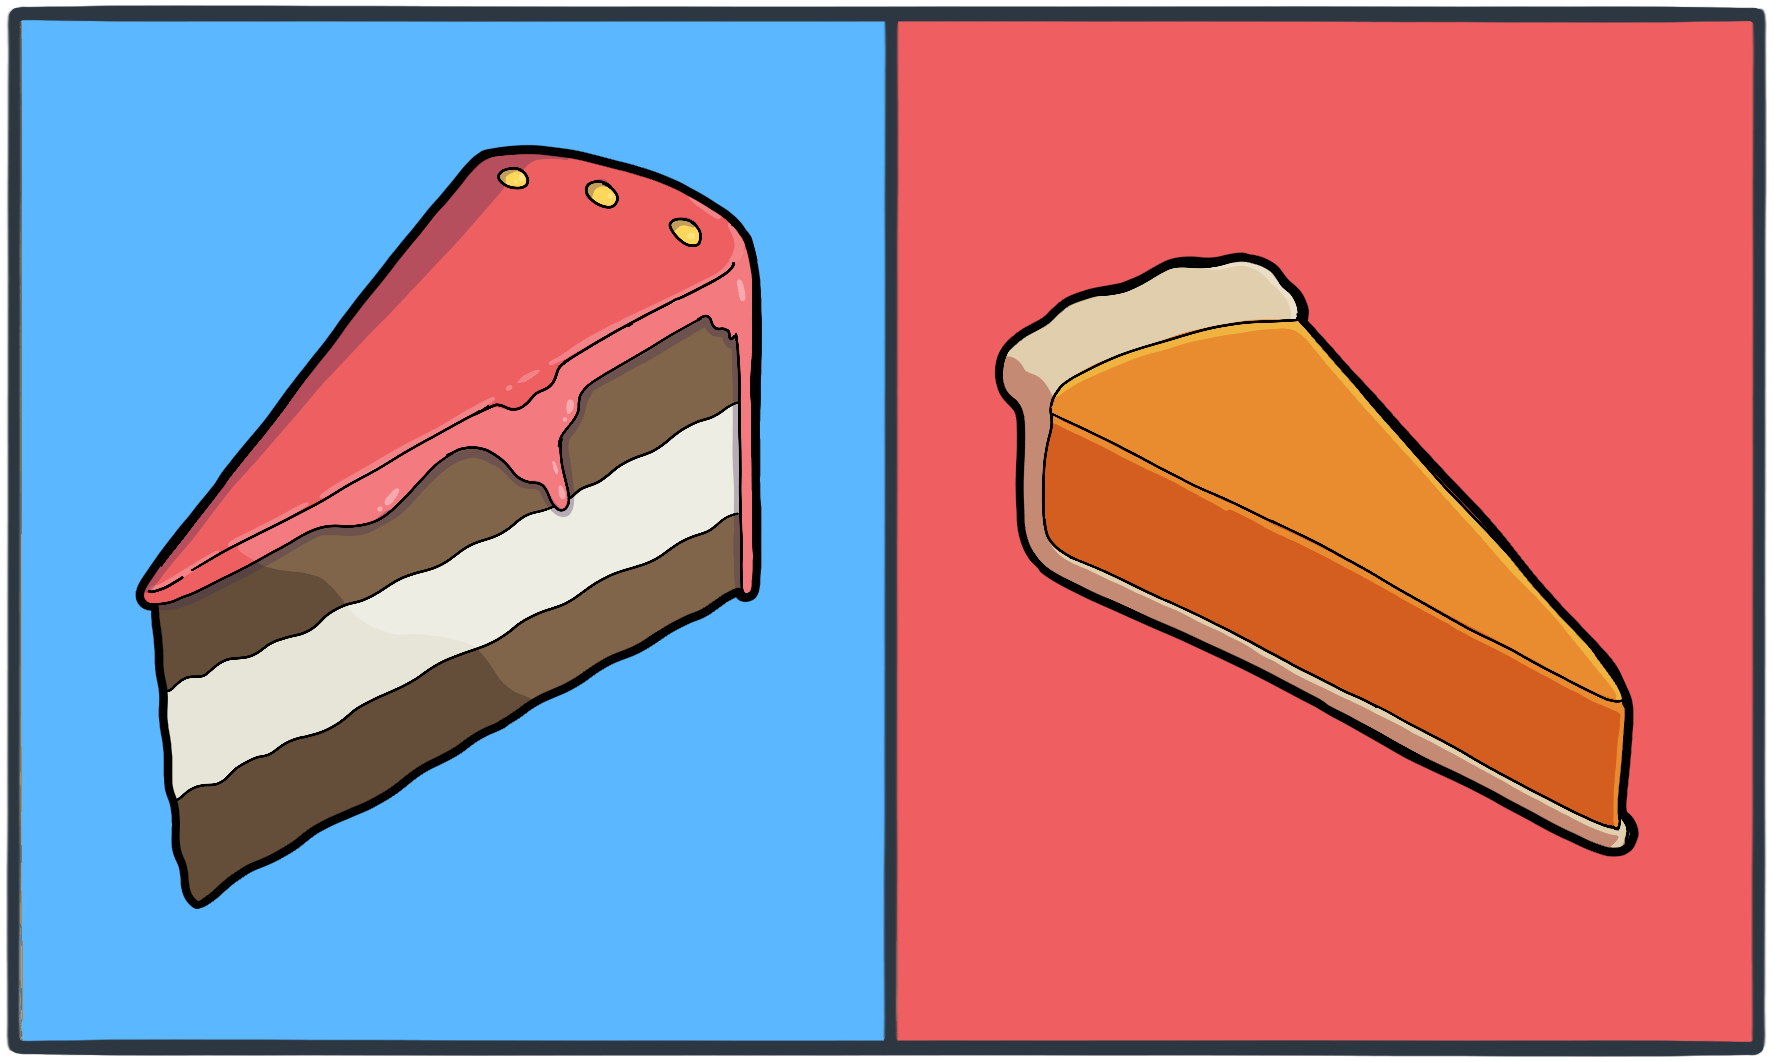 Cake on the left and pie on the right.